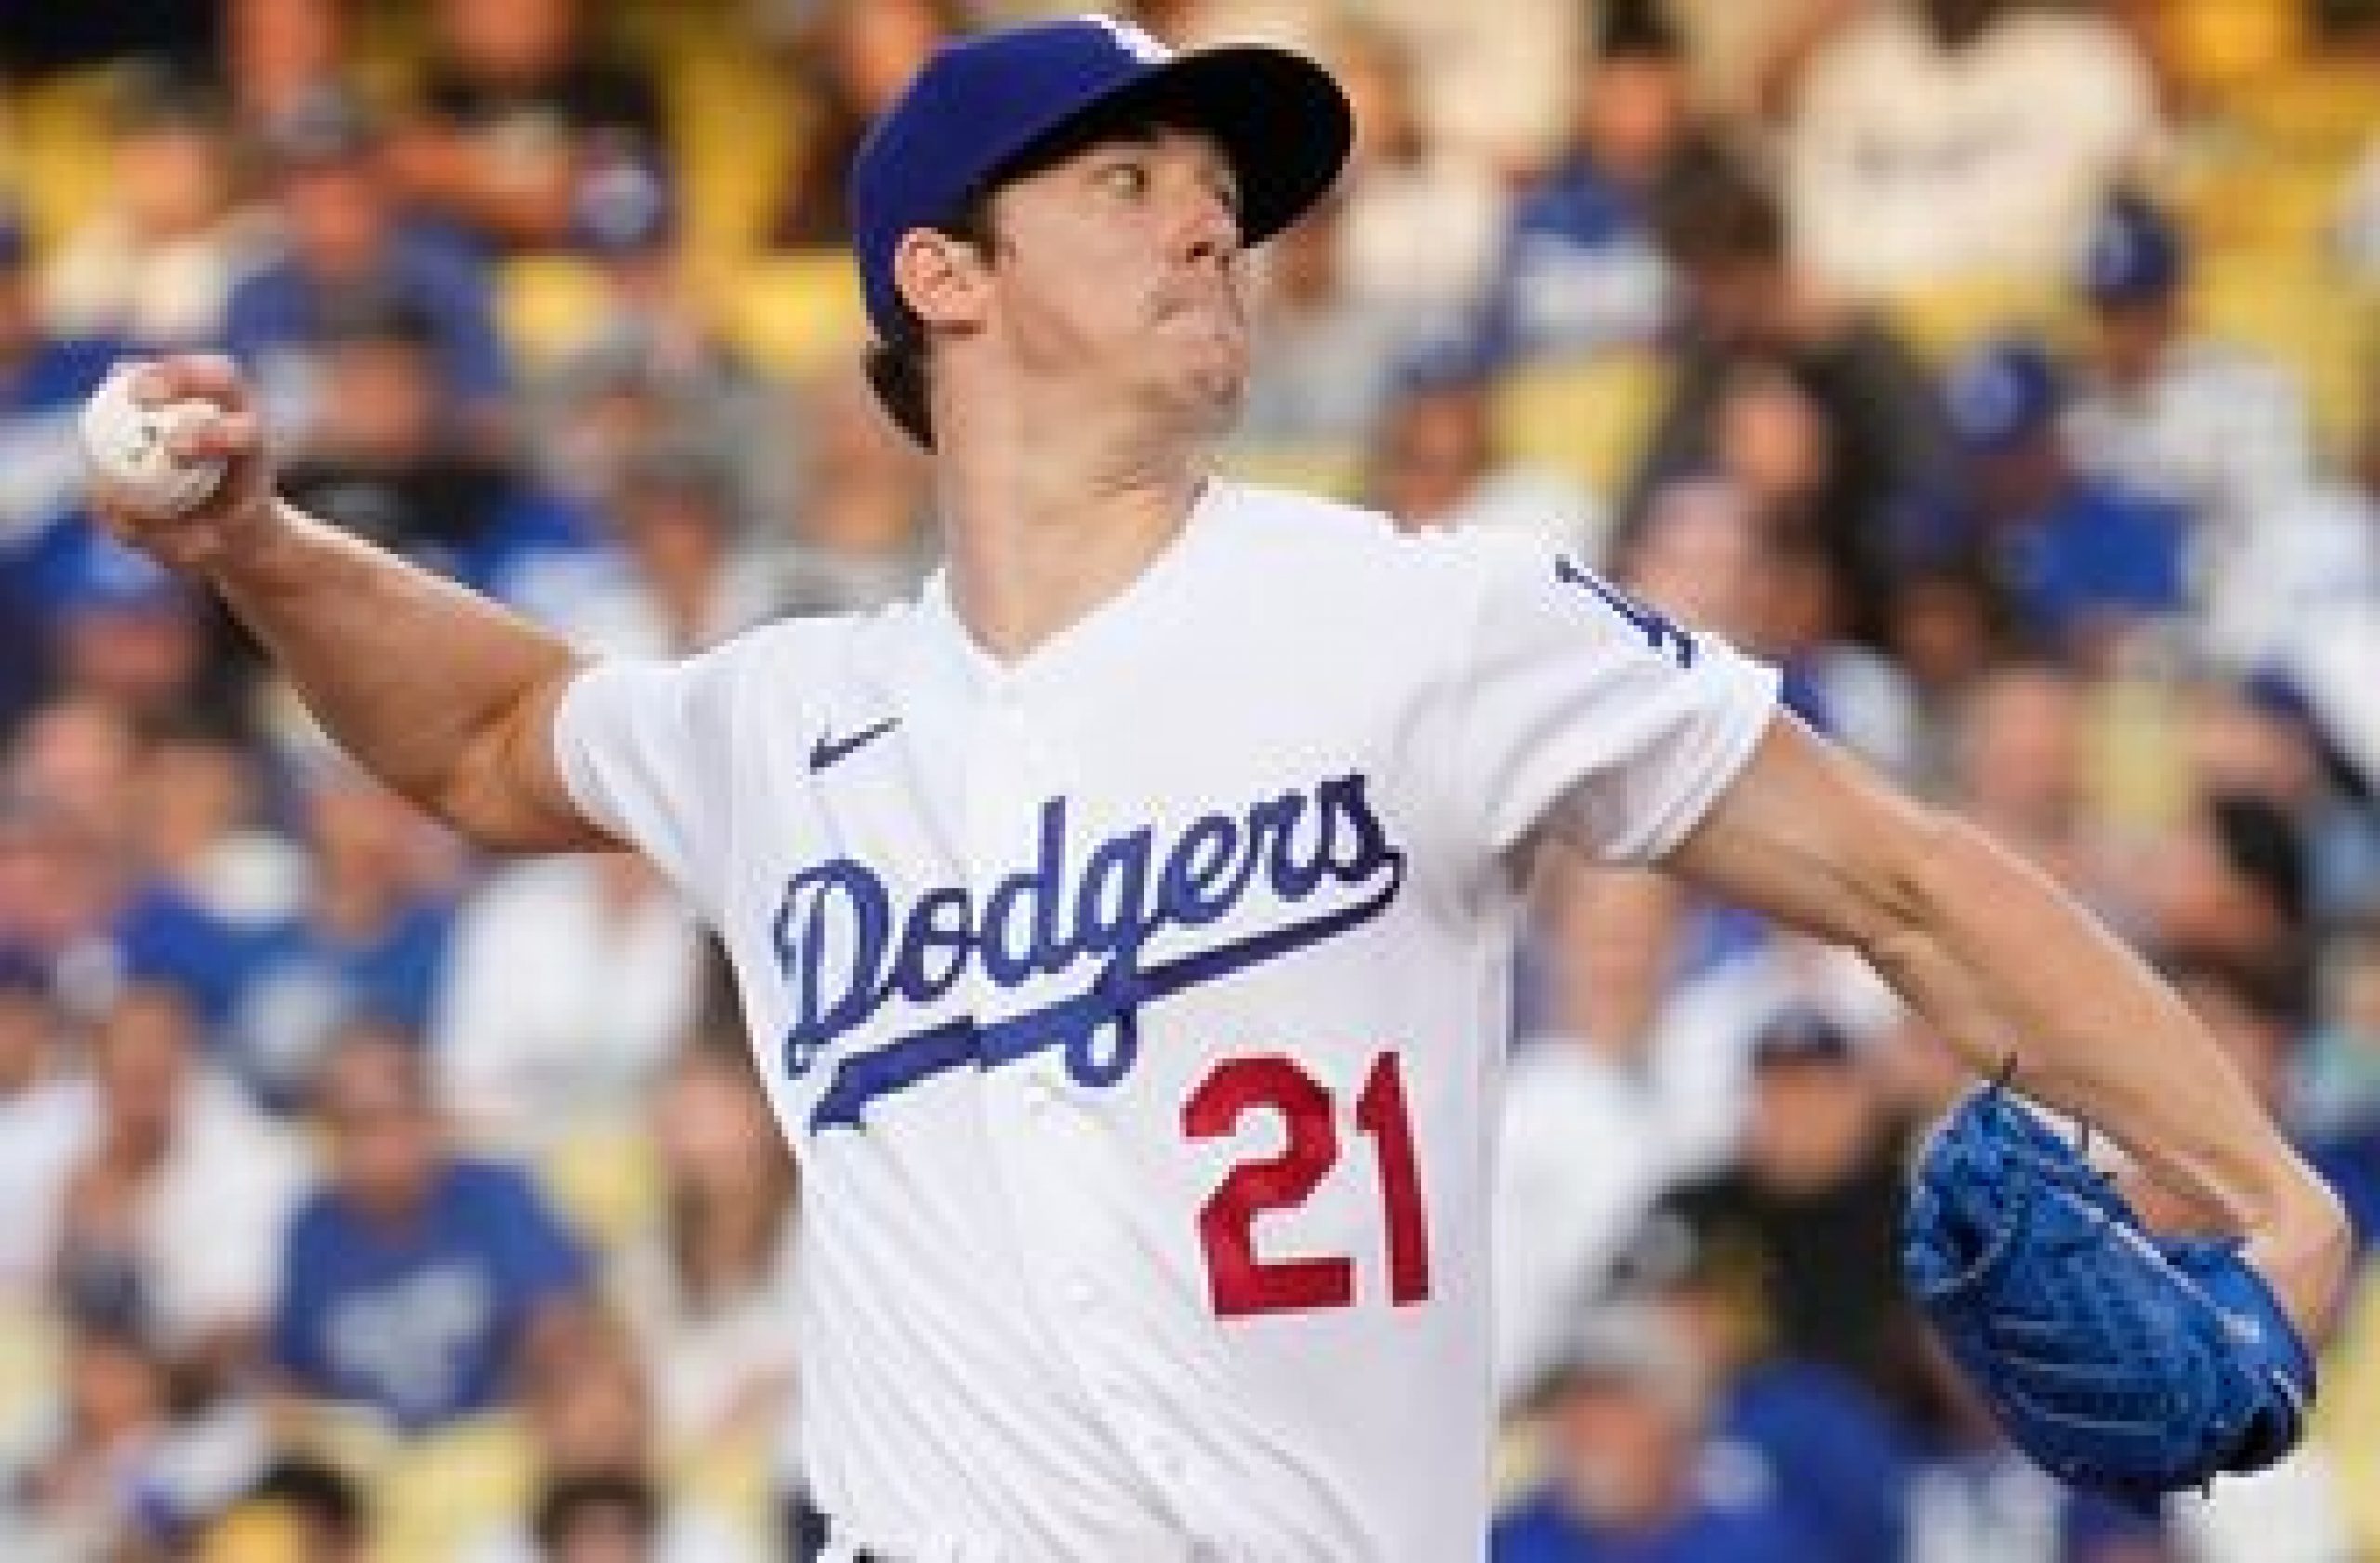 Walker Buehler spins six-plus stellar innings for Dodgers in 3-1 win over Giants